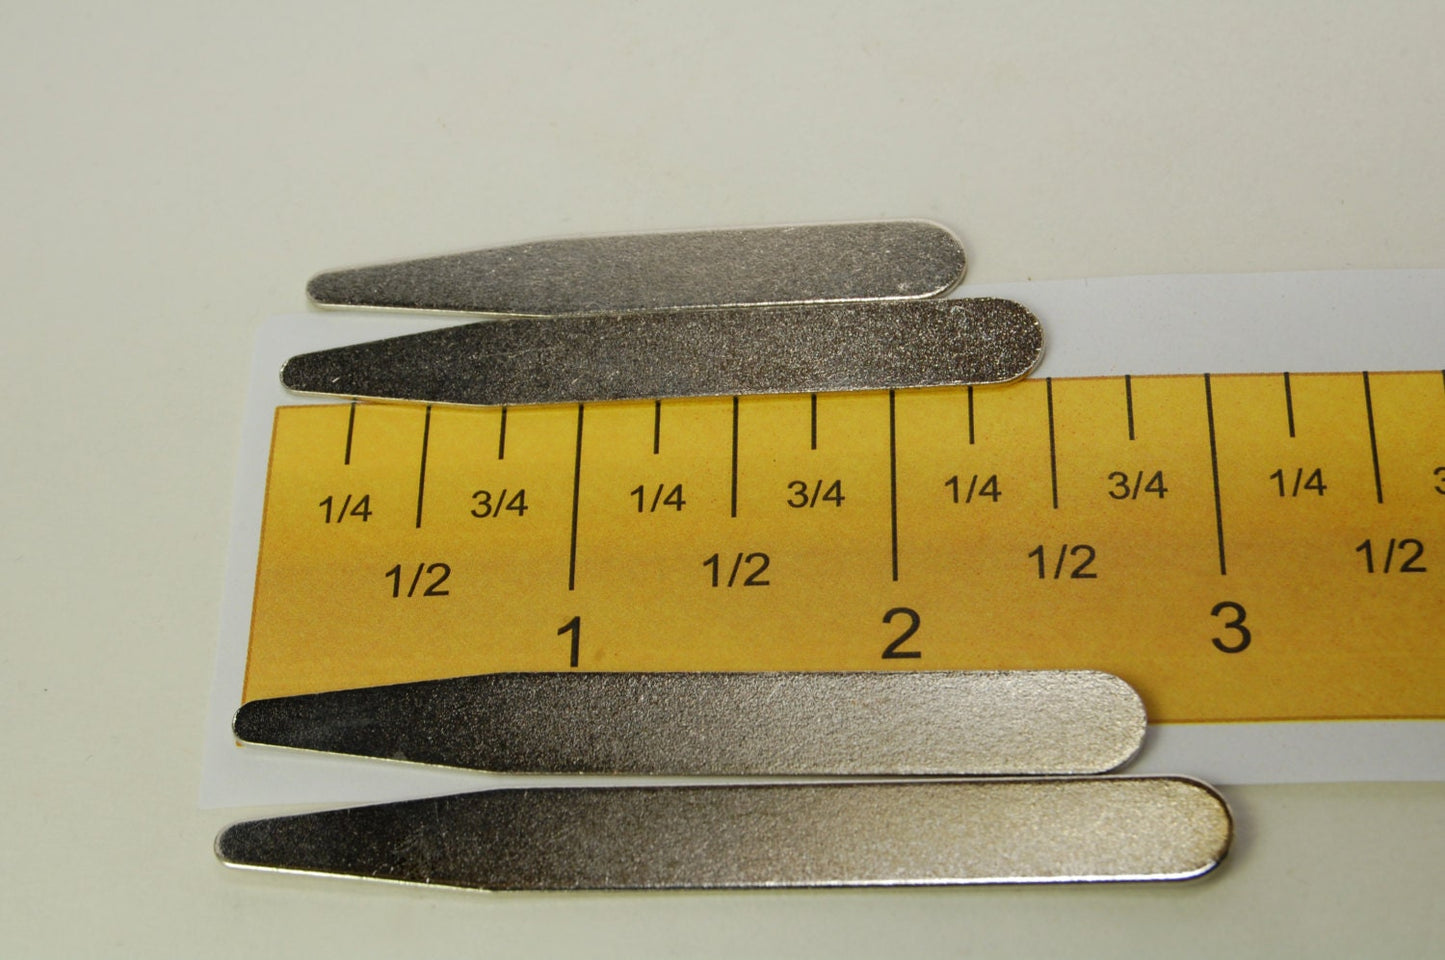 Set of 10 metal COLLAR STAYS / TIPS (20 pieces) - 3 sizes: , 2 1/2", 2 3/4, 3" long x 3/8" wide + add storage box